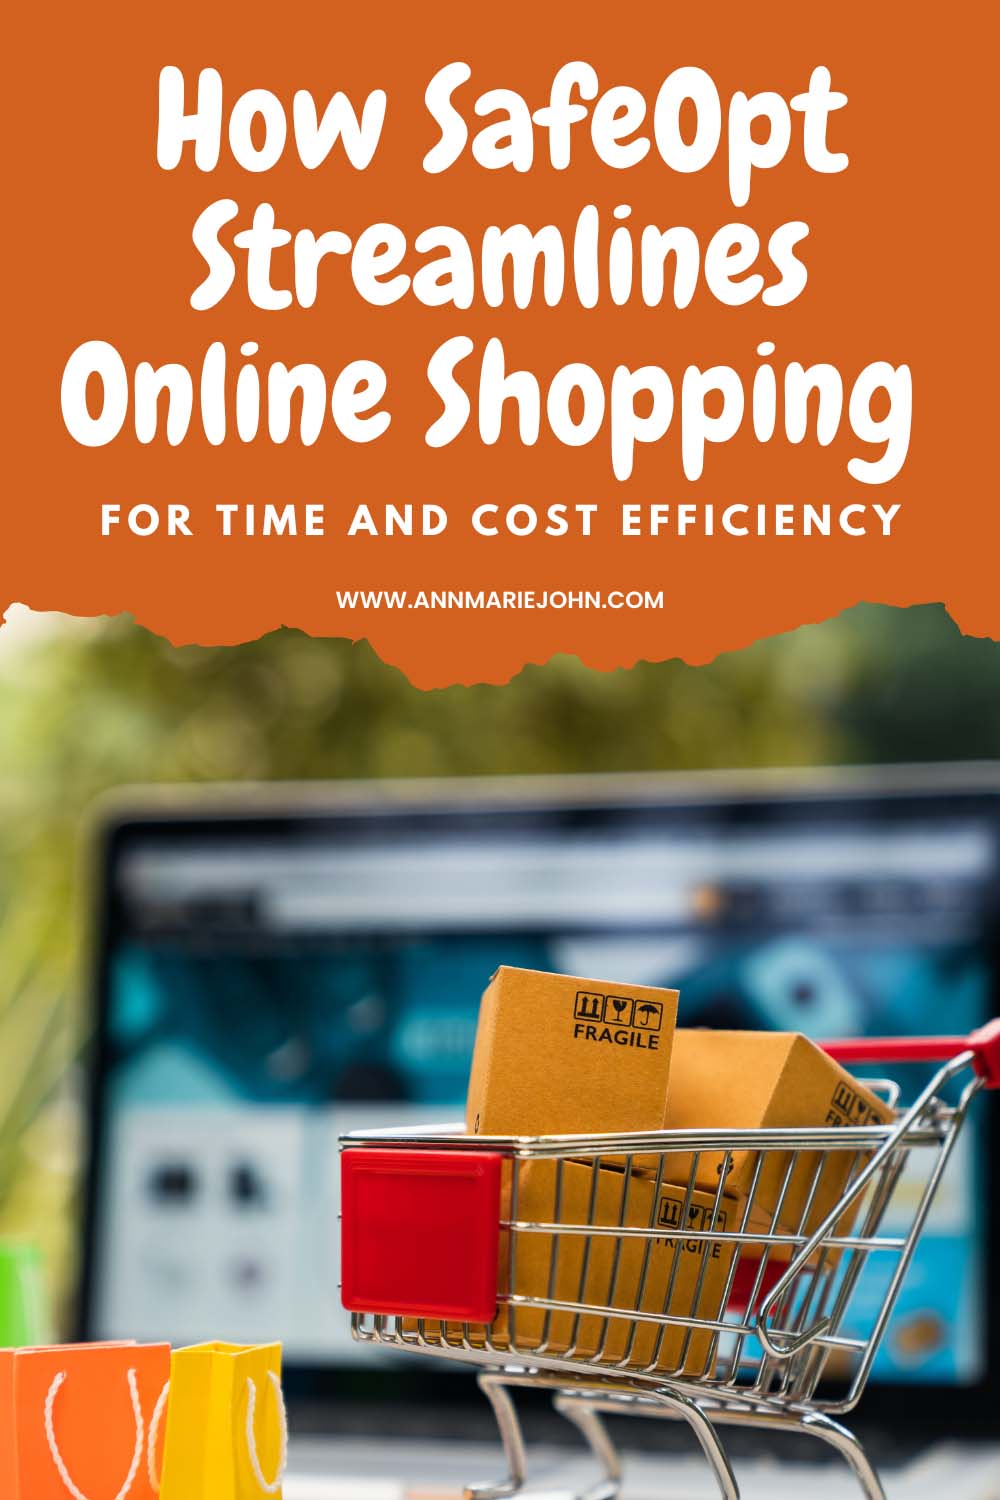 How SafeOpt Streamlines Online Shopping for Time and Cost Efficiency